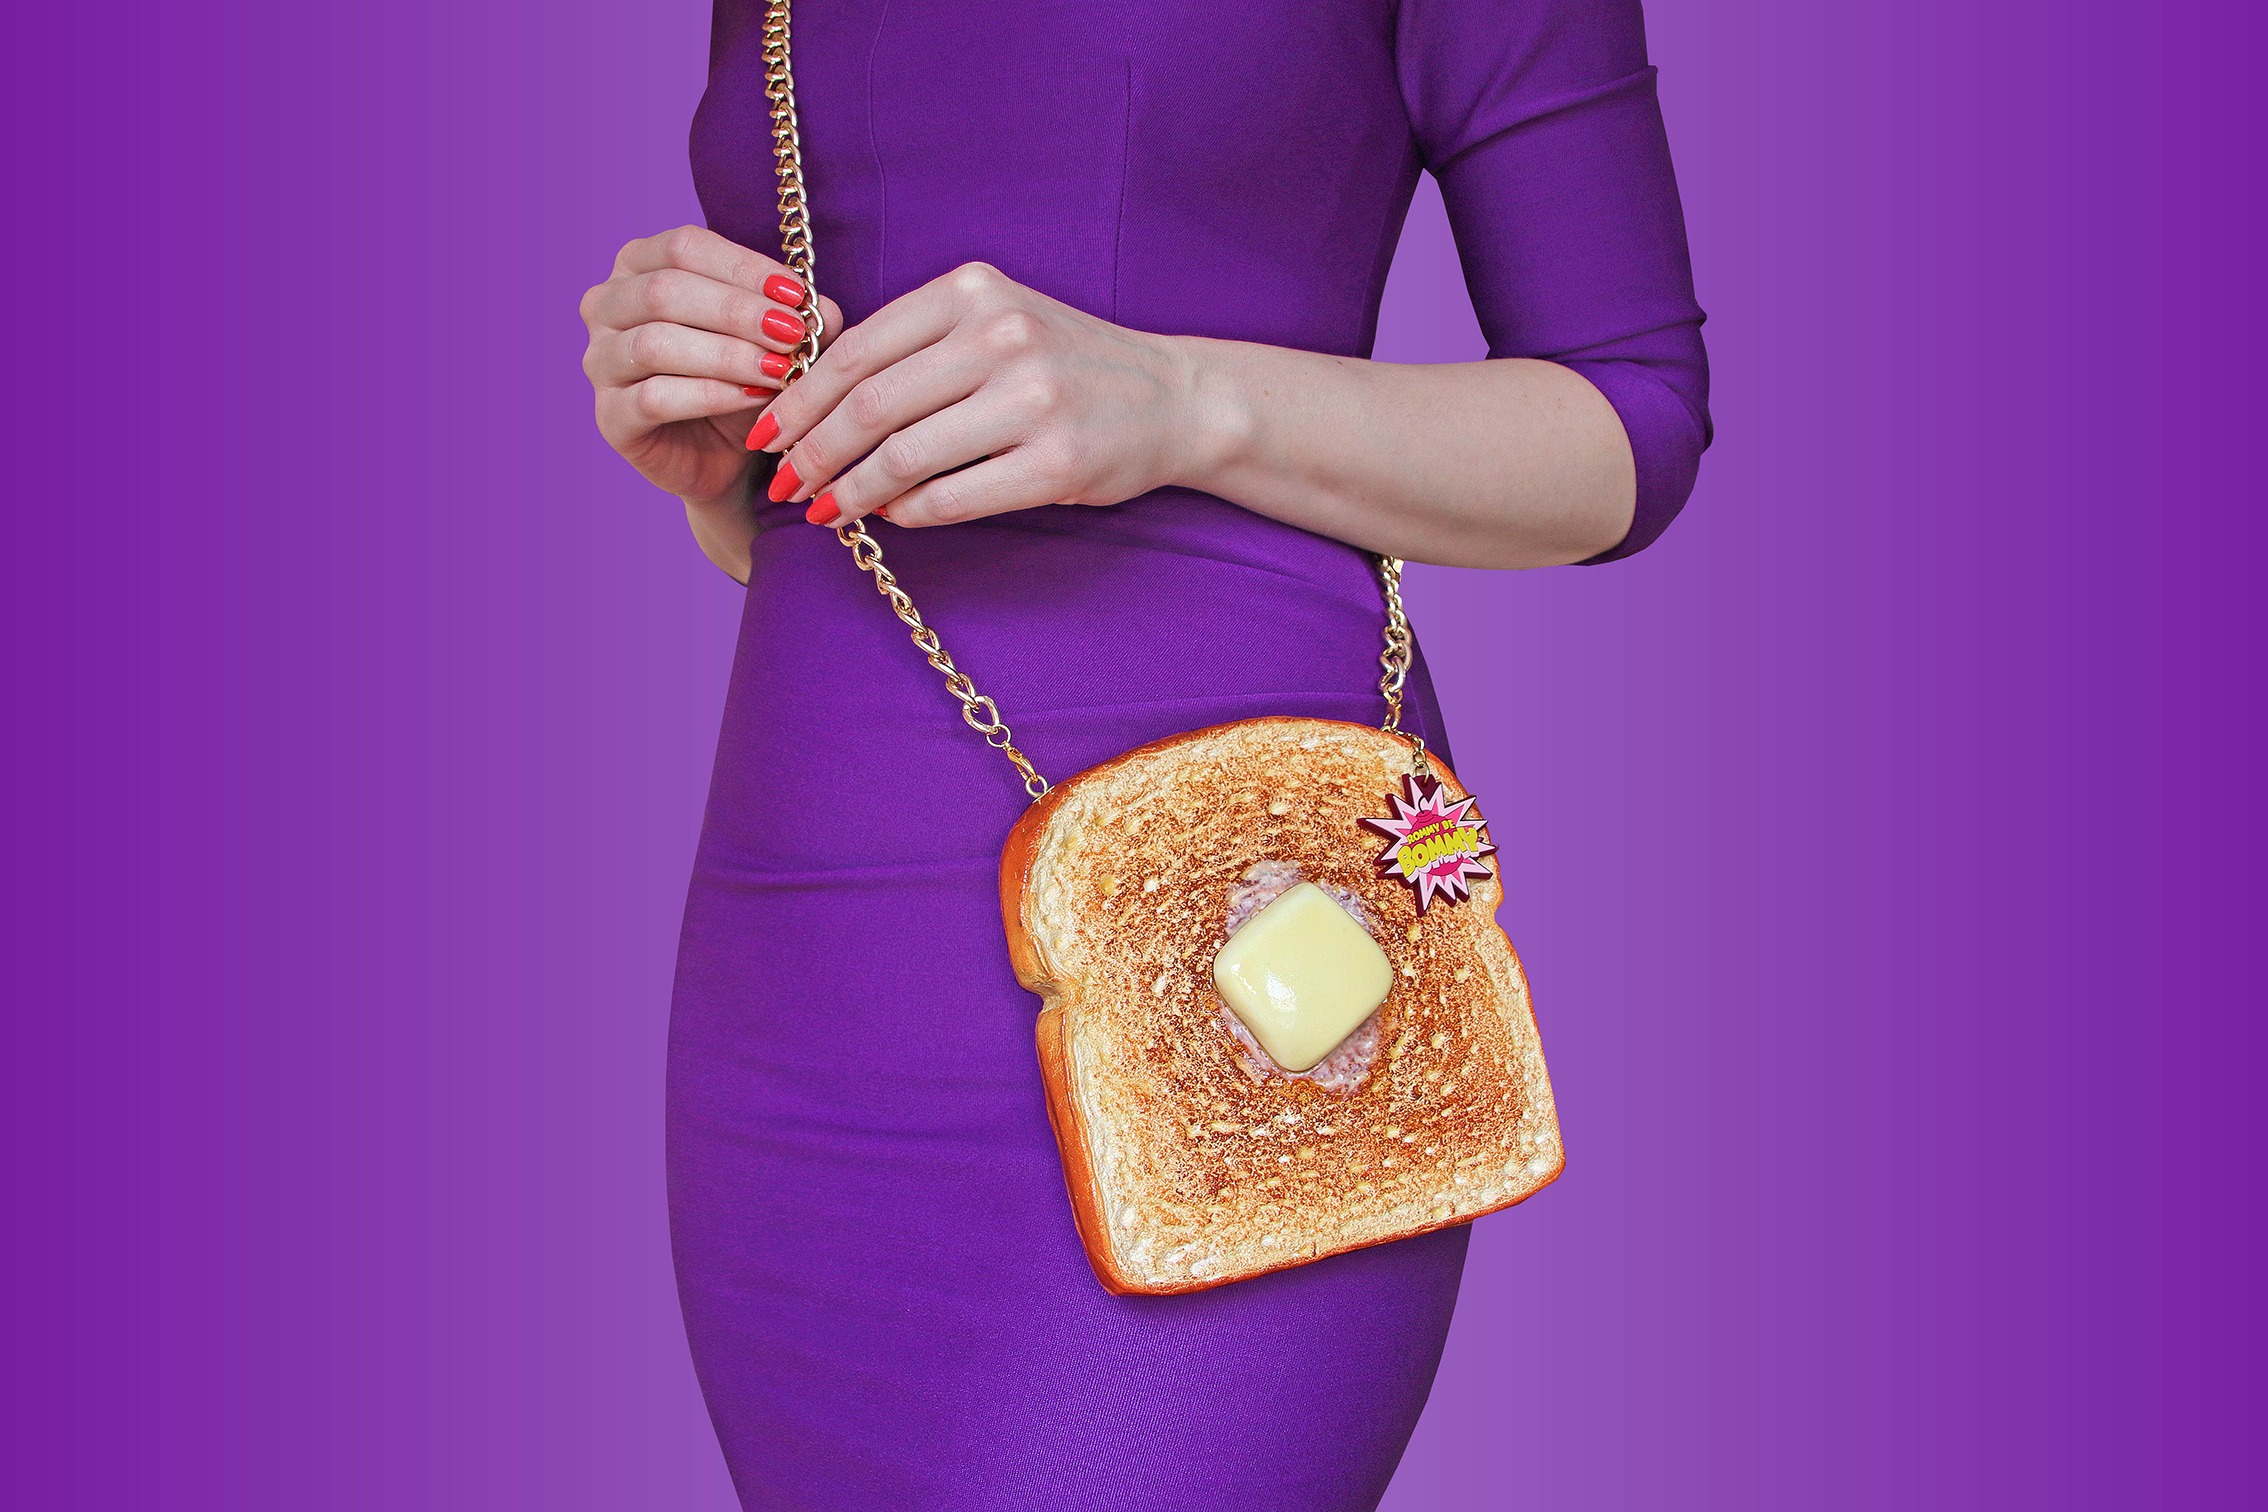 Food-inspired handbags that will give you hunger pangs